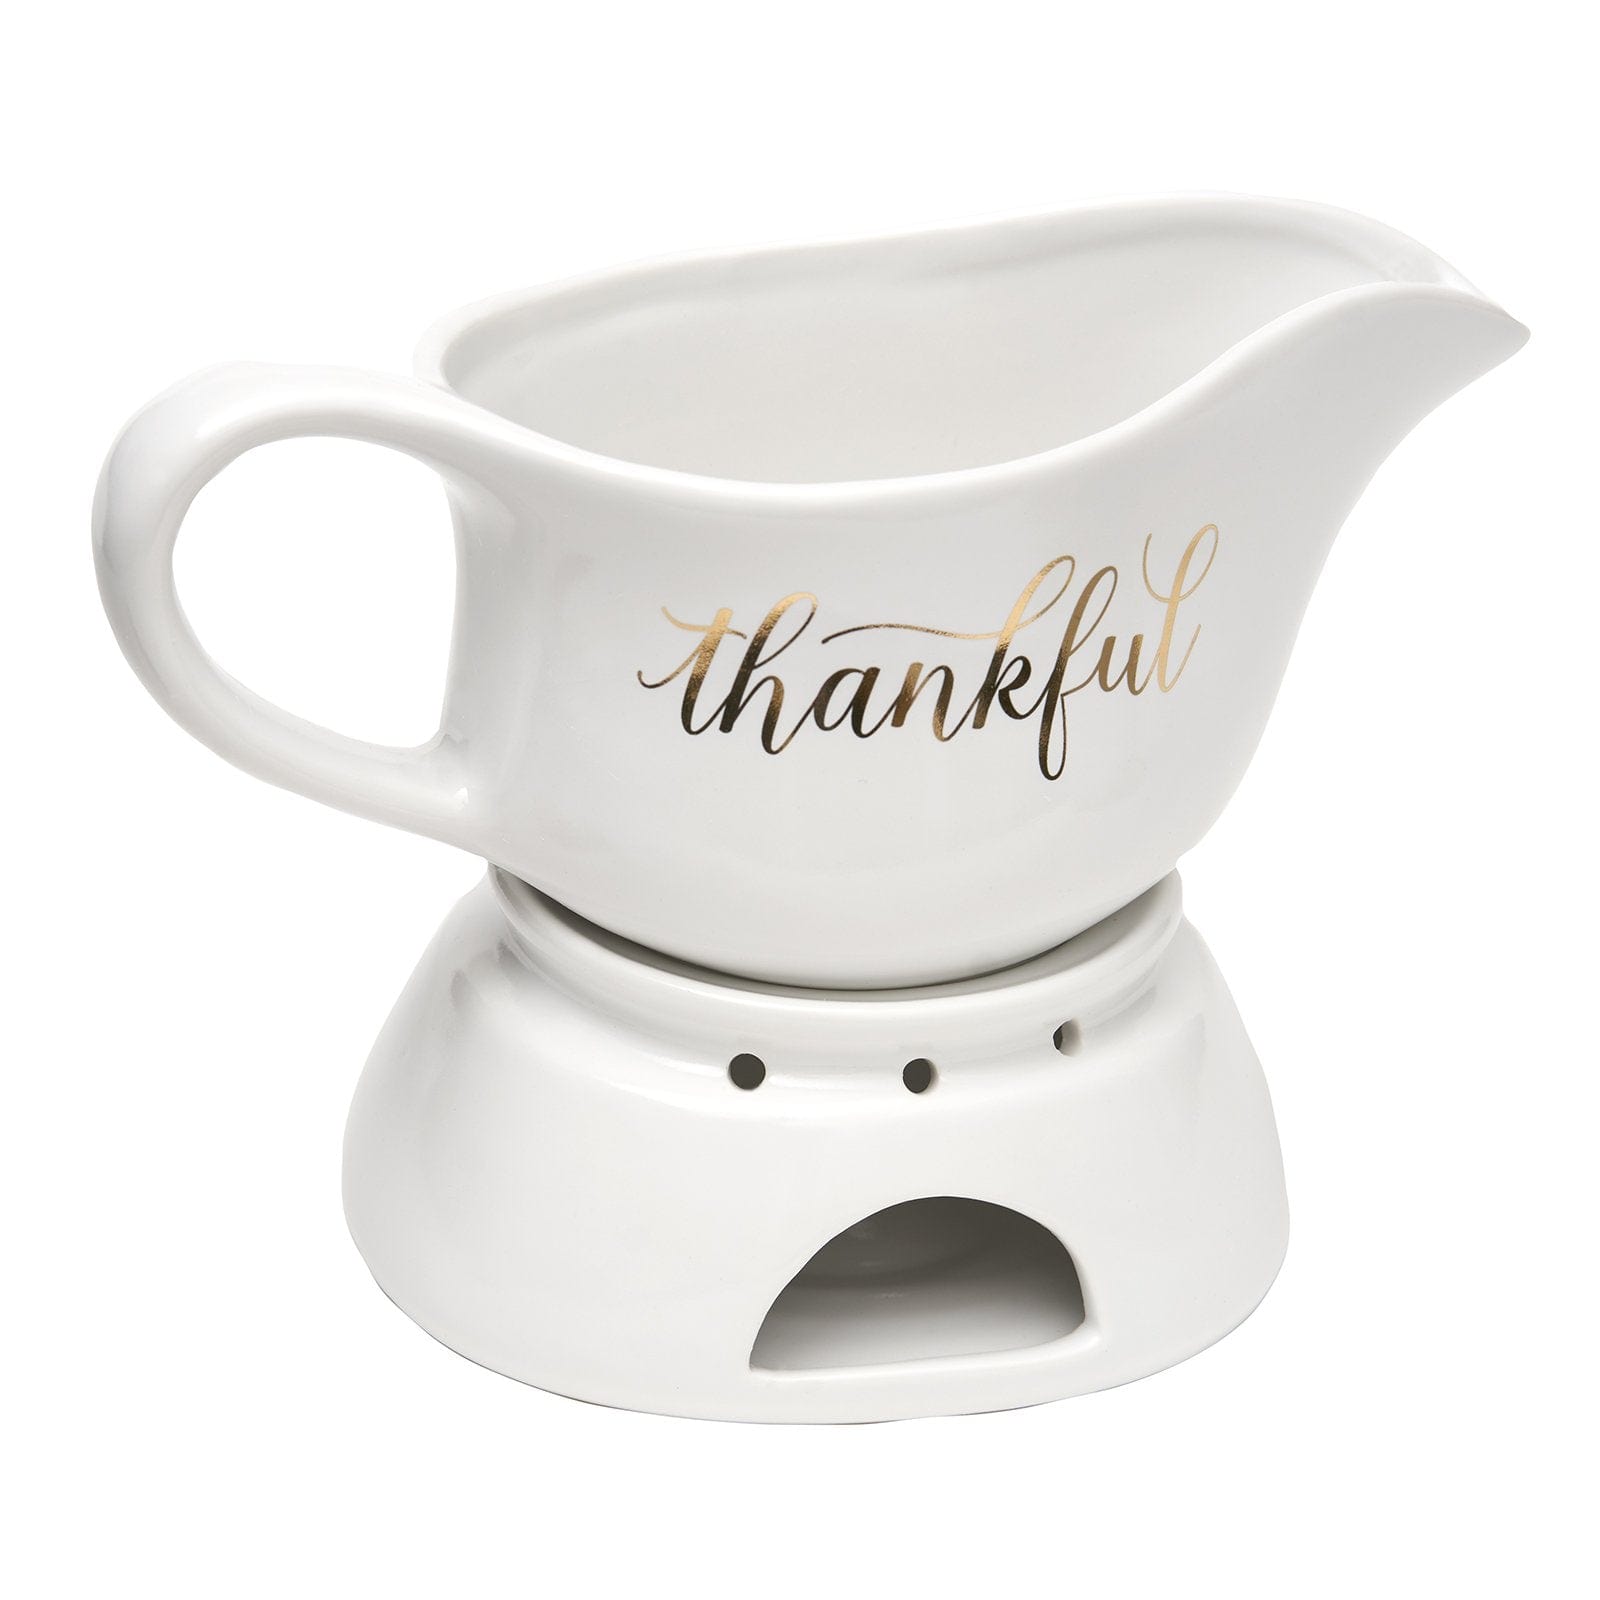 Thankful Gravy Boat with Warming Stand Style Me Pretty